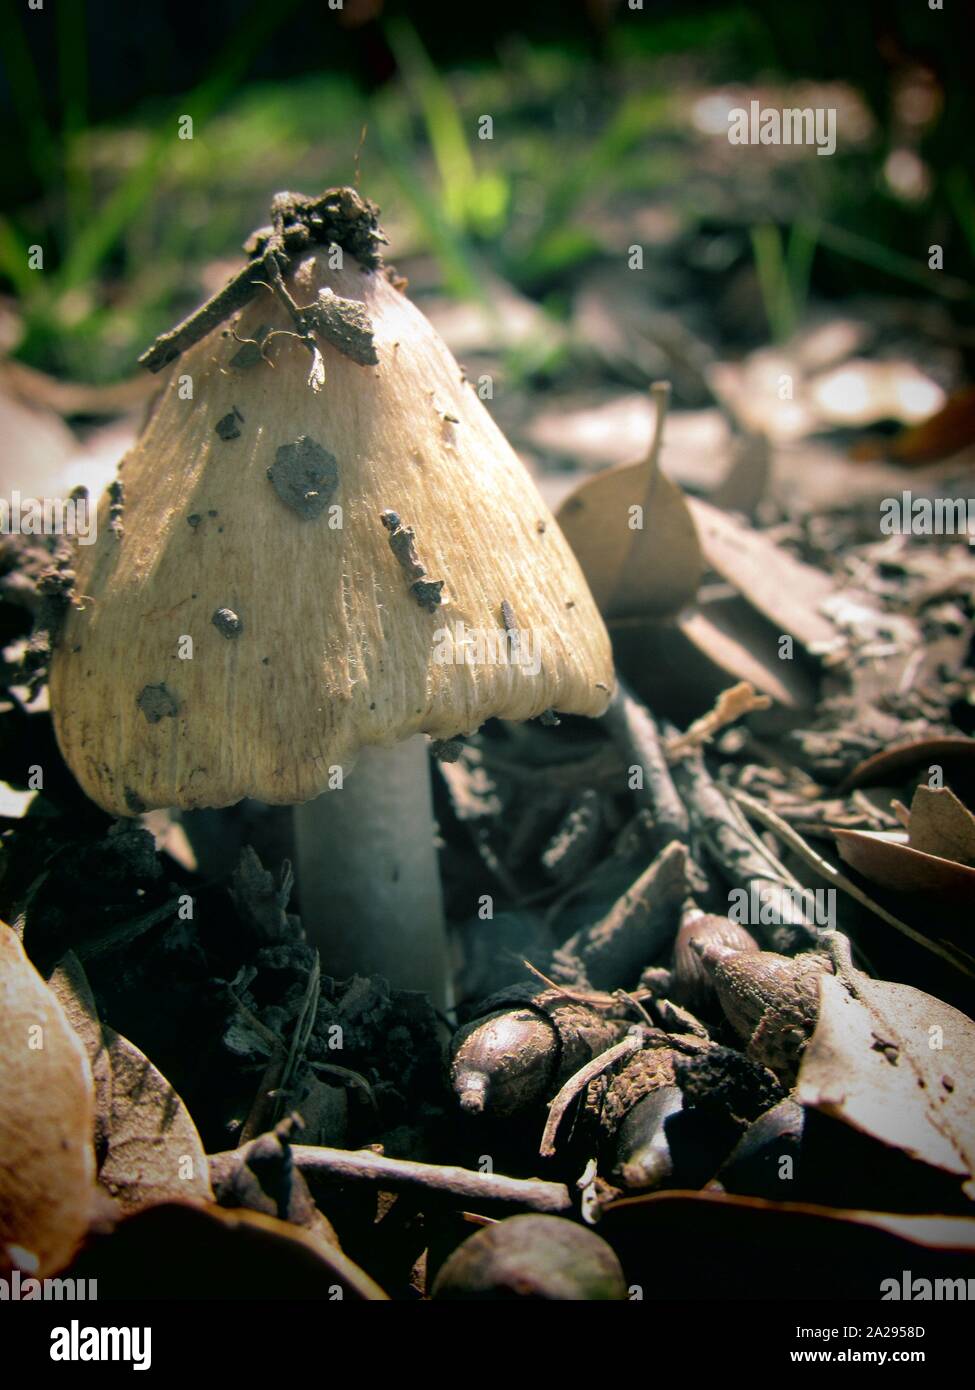 Mushroom appearing after a rain in Texas Stock Photo